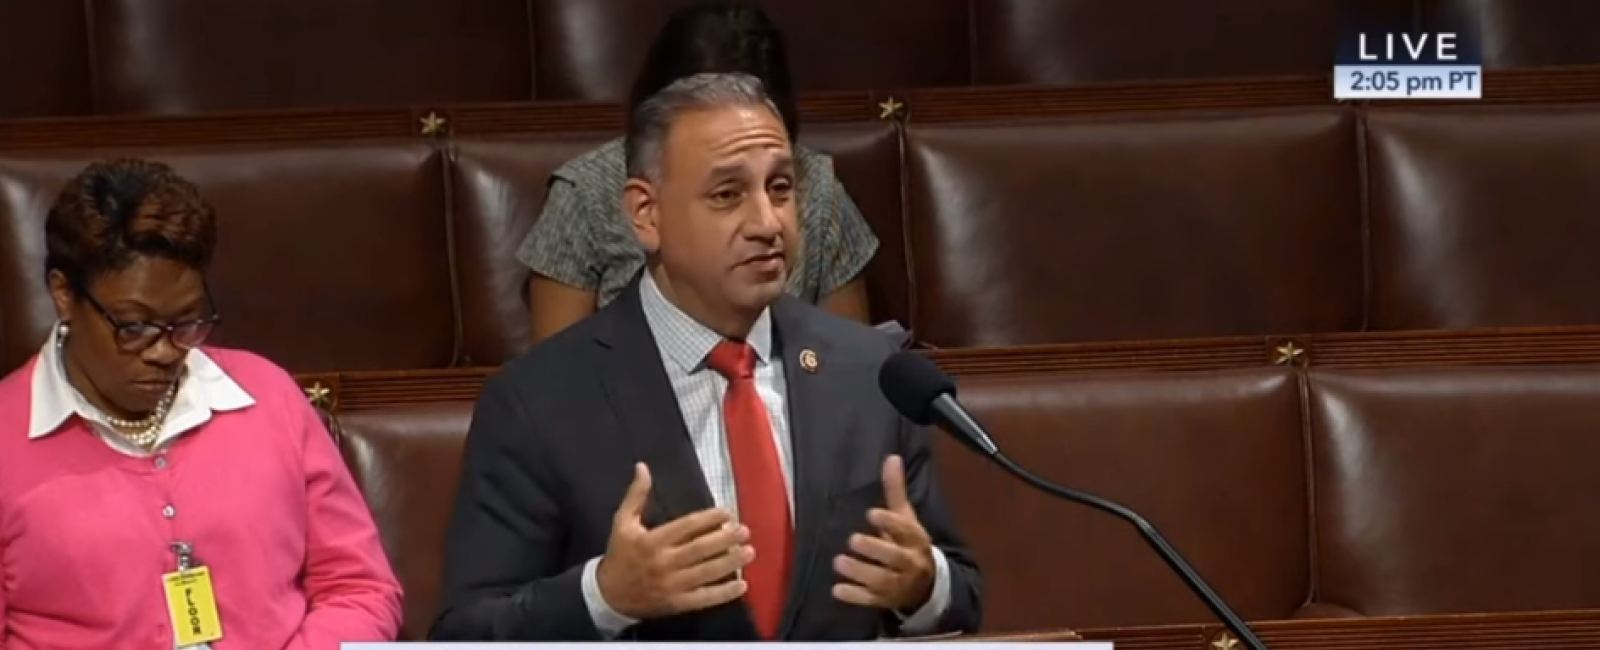 Rep. Cisneros on the floor of the House